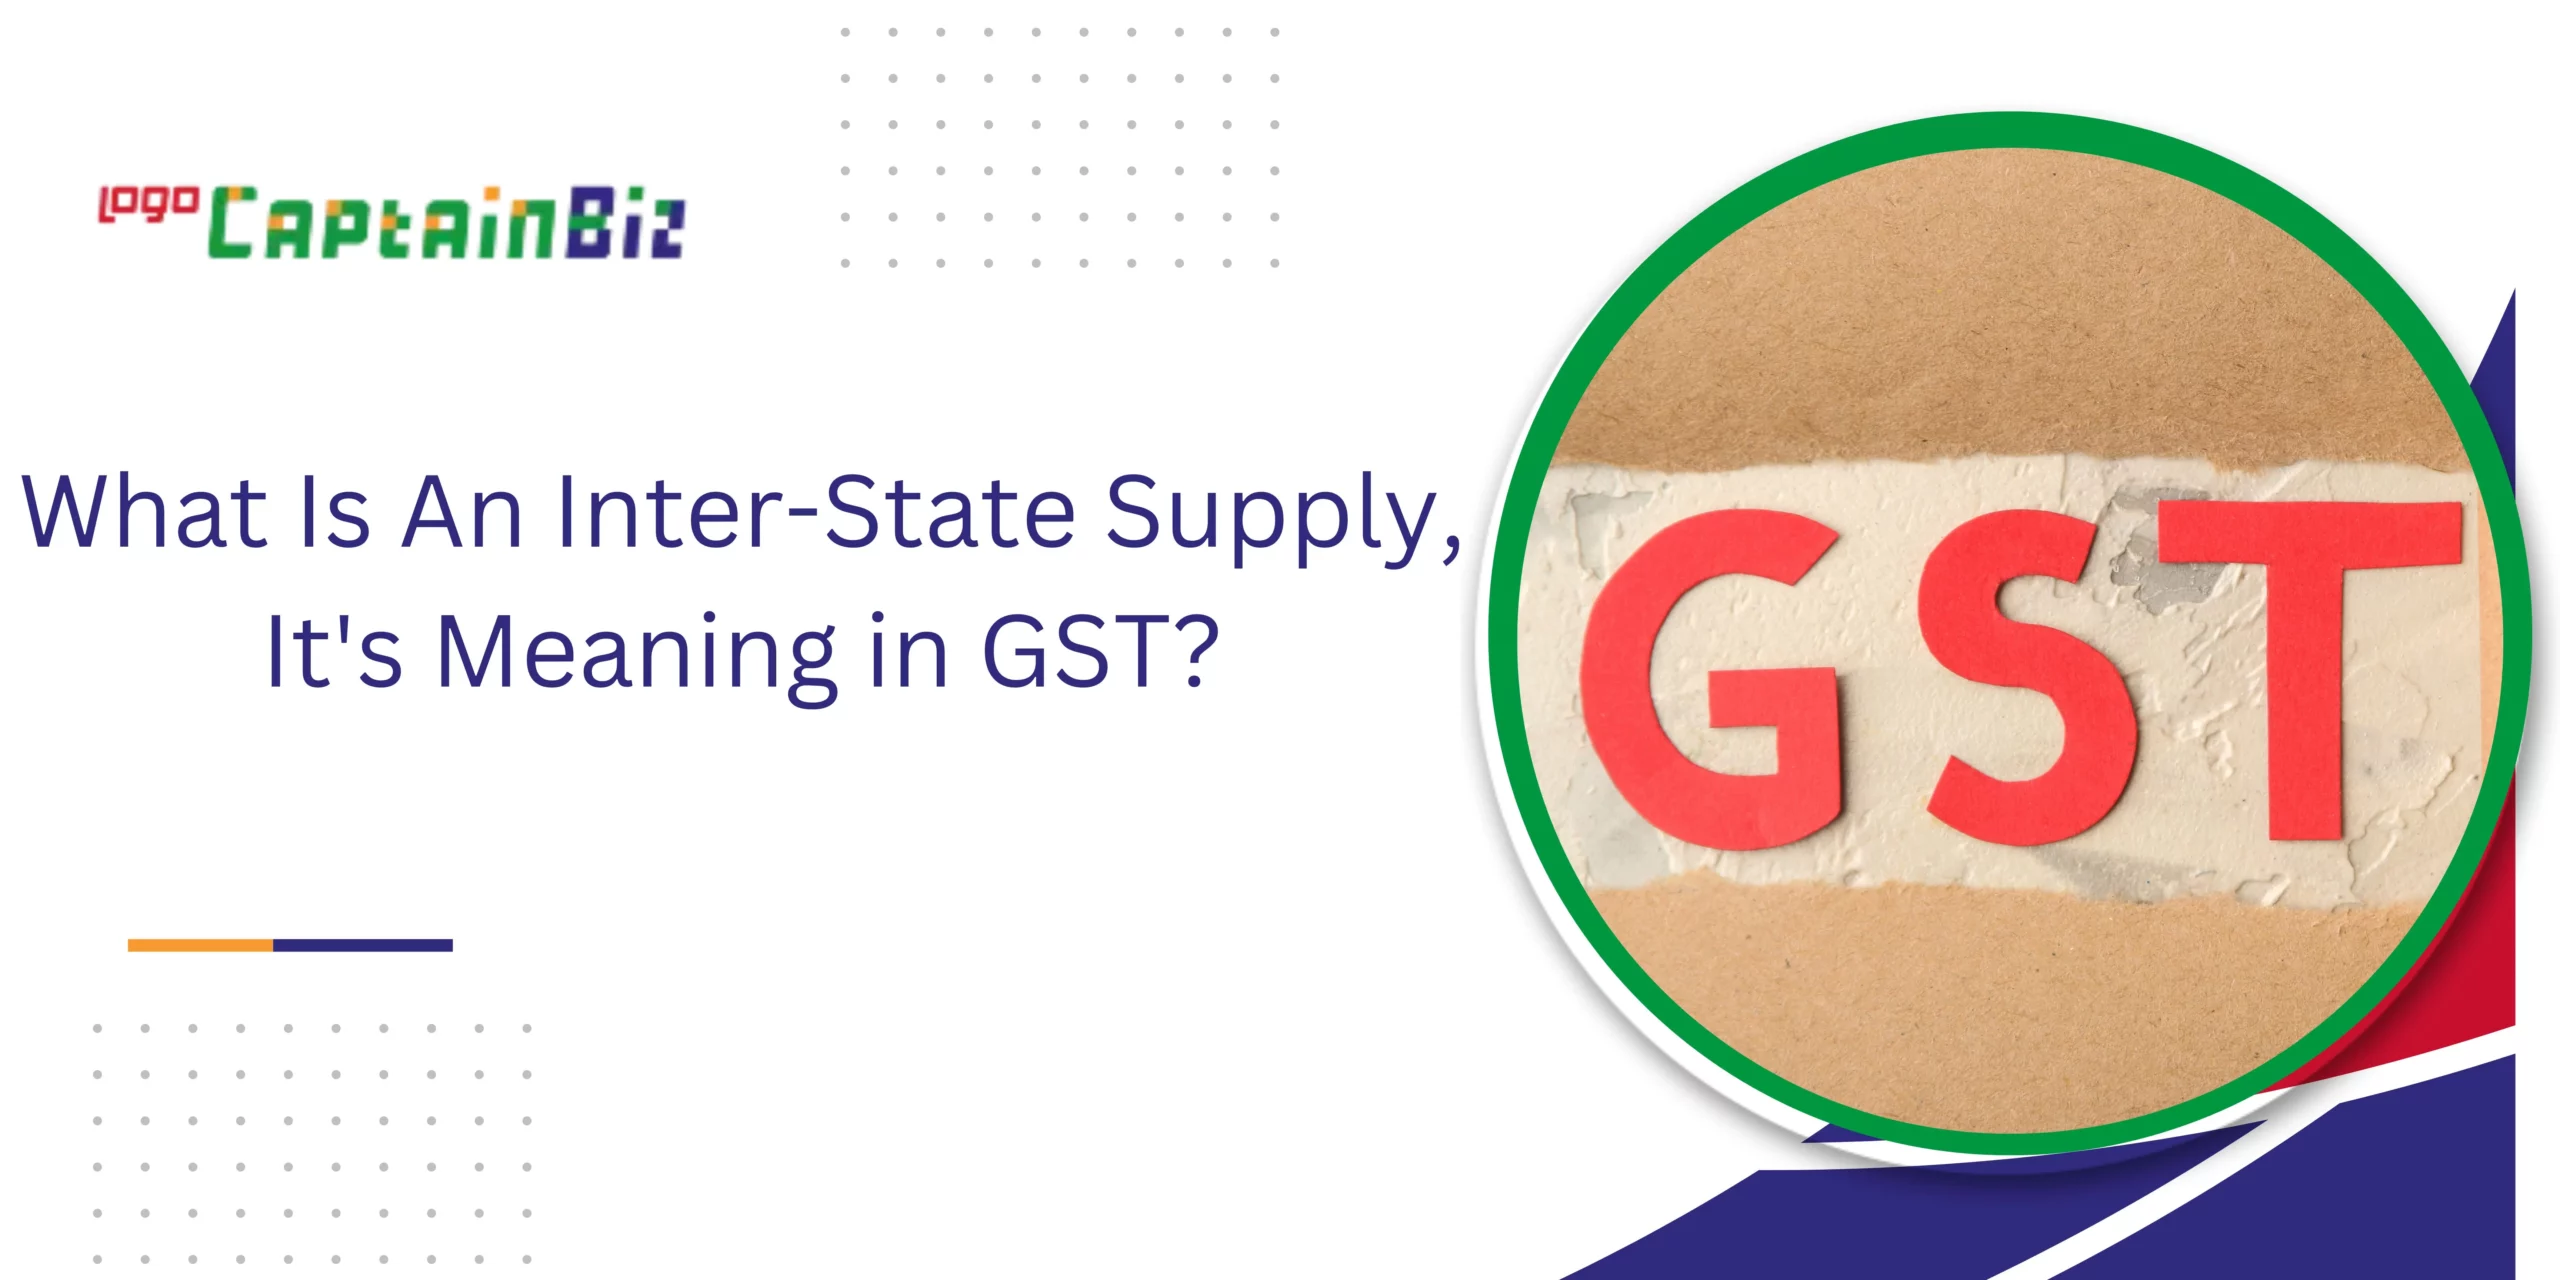 CaptainBiz: What Is An Inter-State Supply Its Meaning in GST